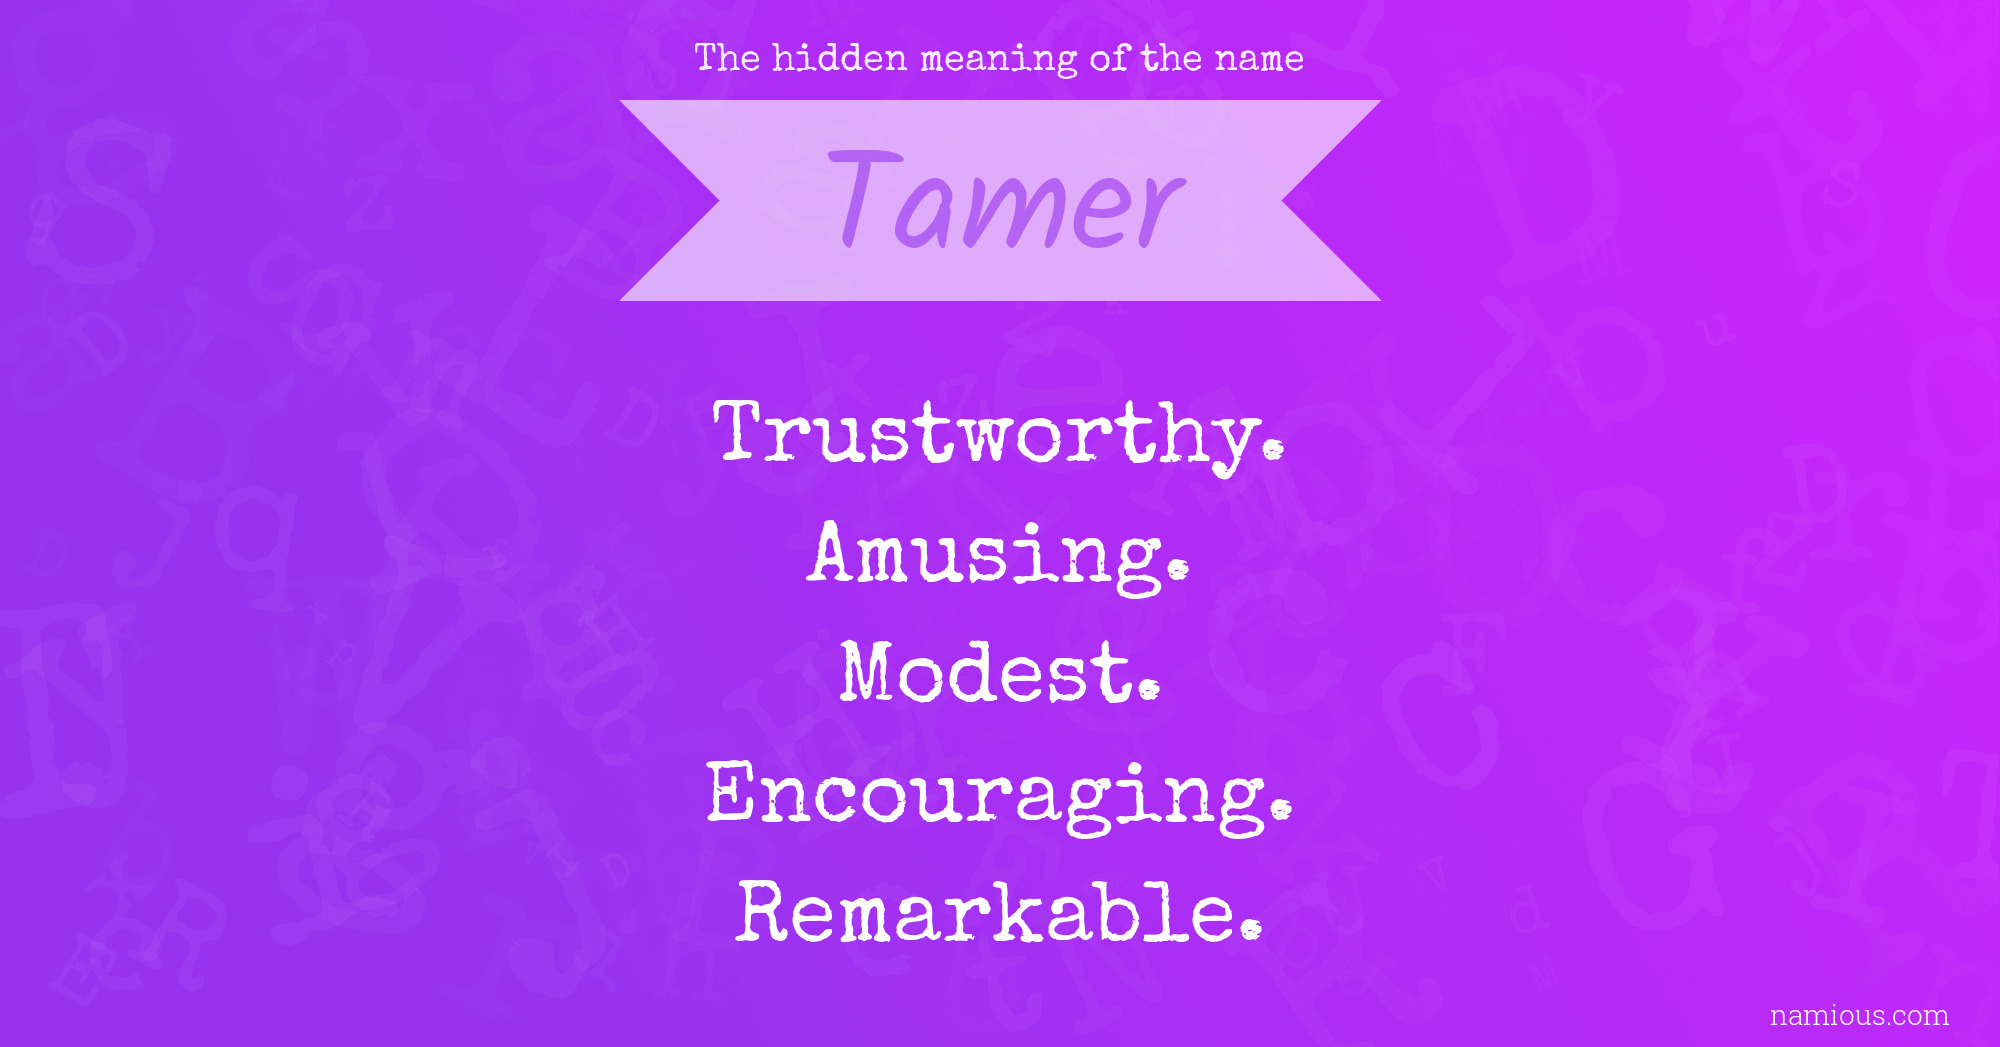 The hidden meaning of the name Tamer